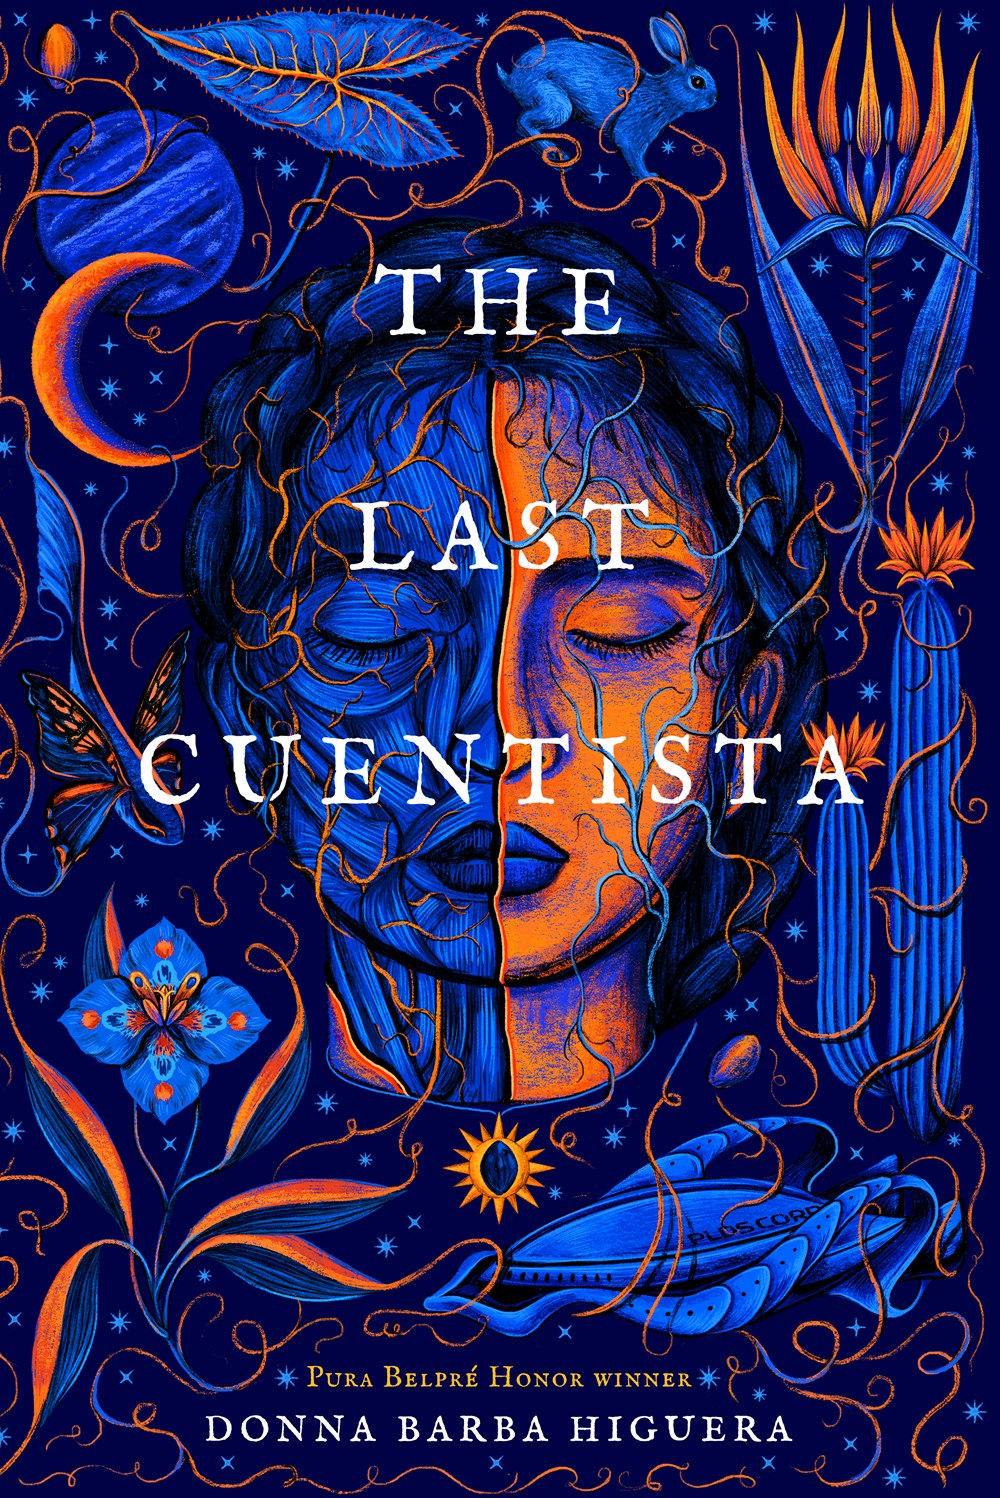 Cover image of book The Last Cuentista by Donna Barba Higuera